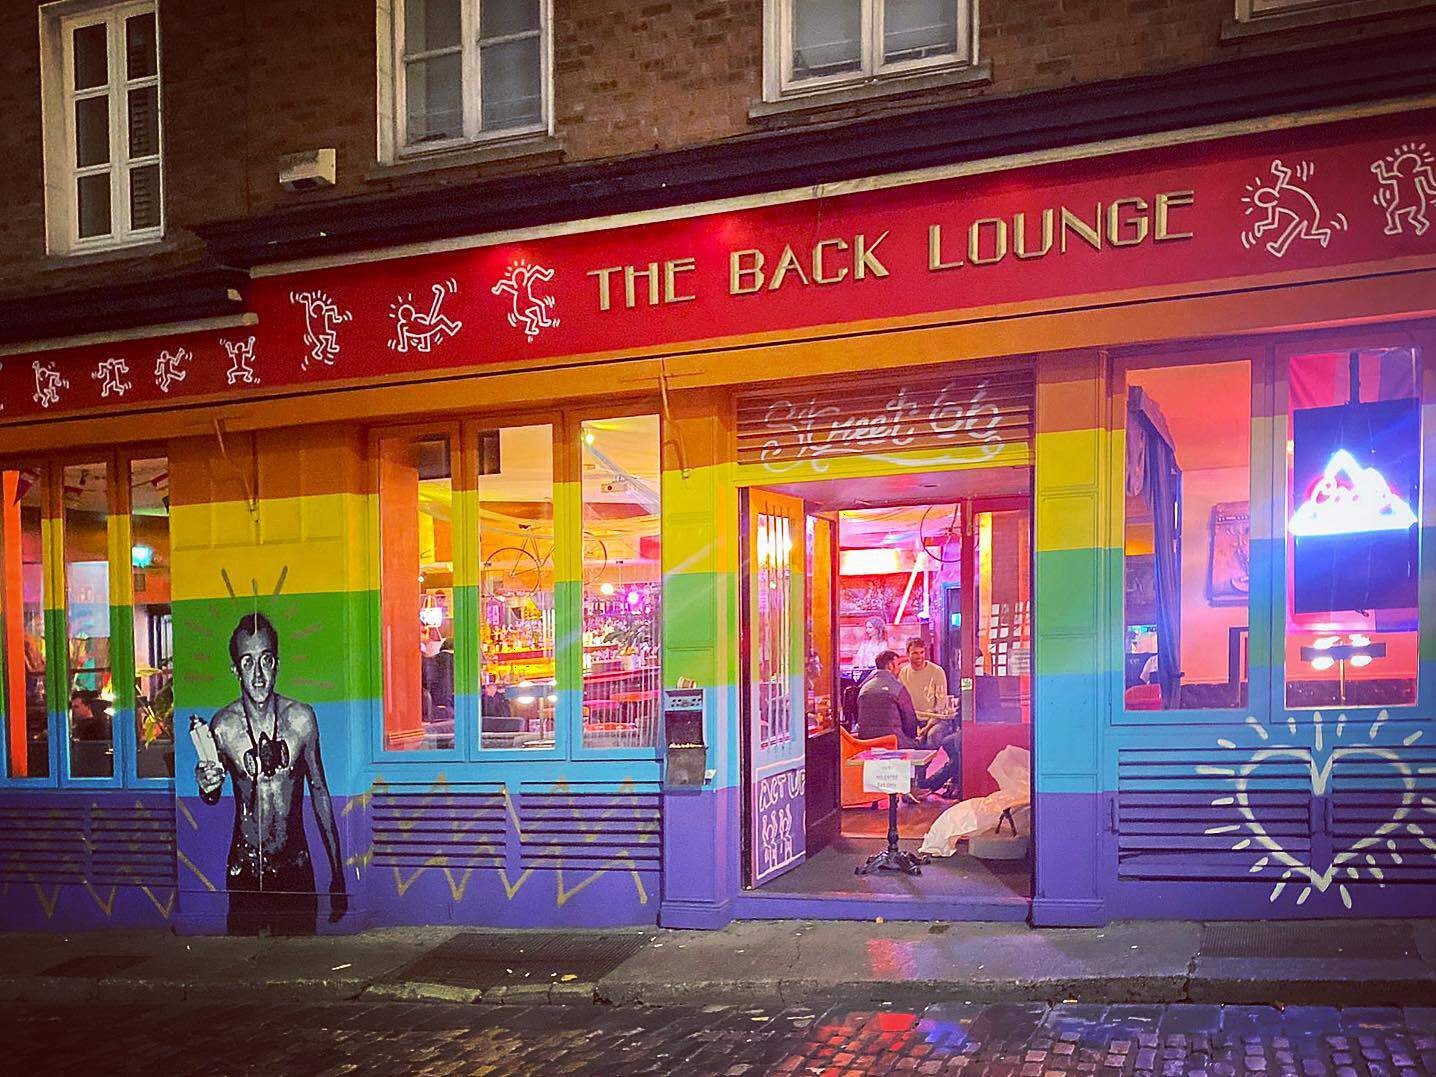 The exterior facade of The Back Lounge painted in the Pride flag colours.